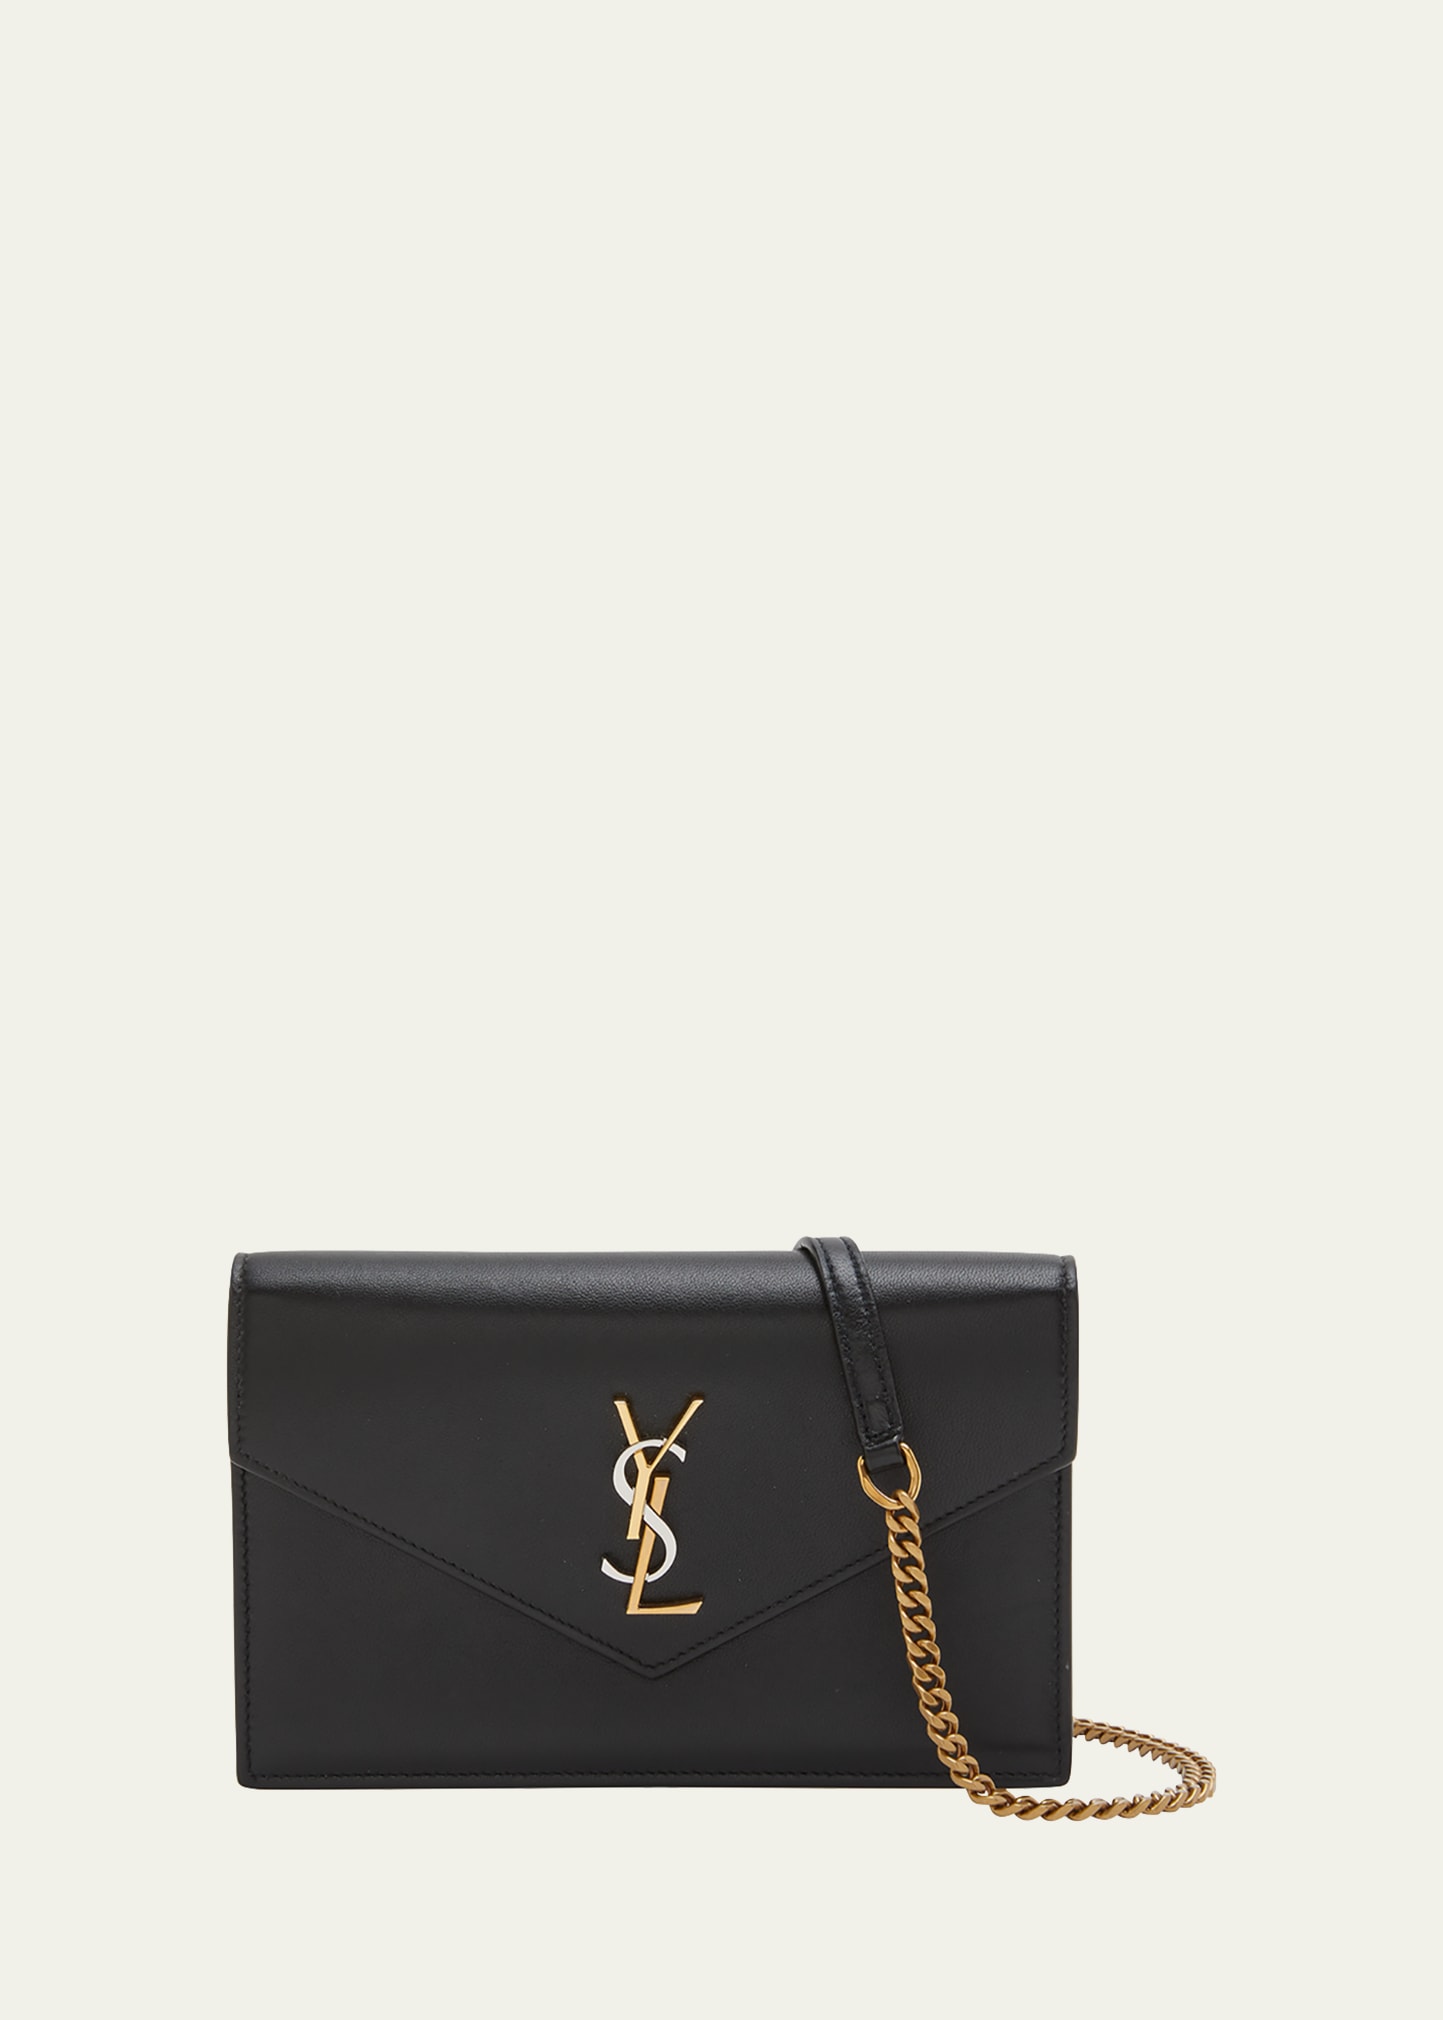 Saint Laurent Tricolor Ysl Monogram Nappa Leather Wallet On Chain In Black